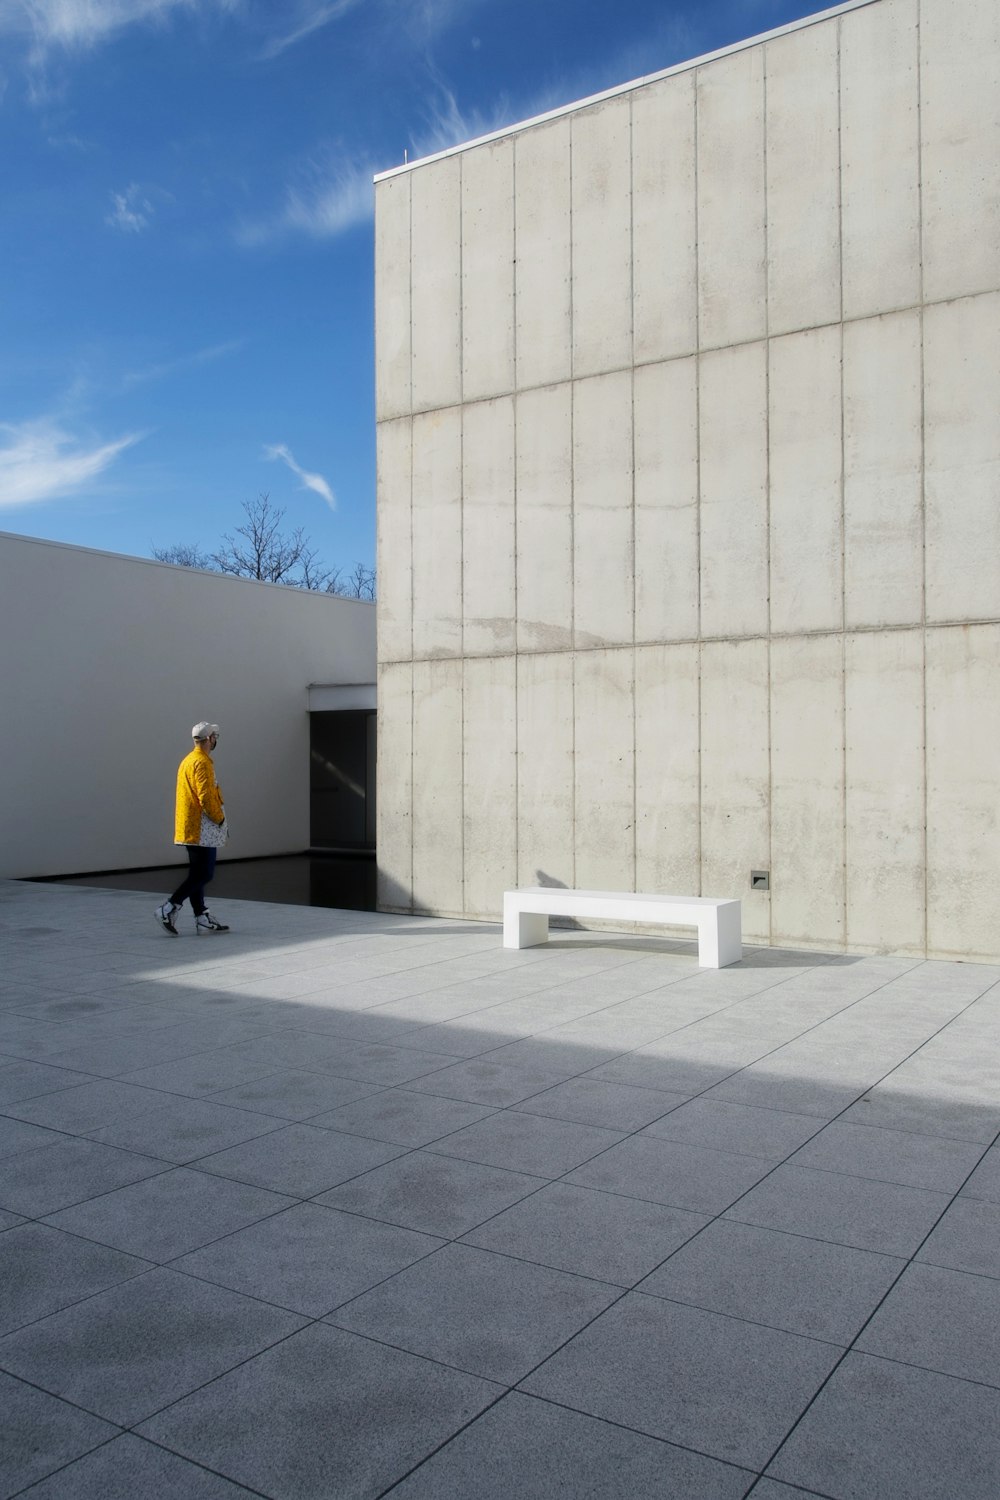 man in yellow jacket and black pants walking on gray concrete floor during daytime